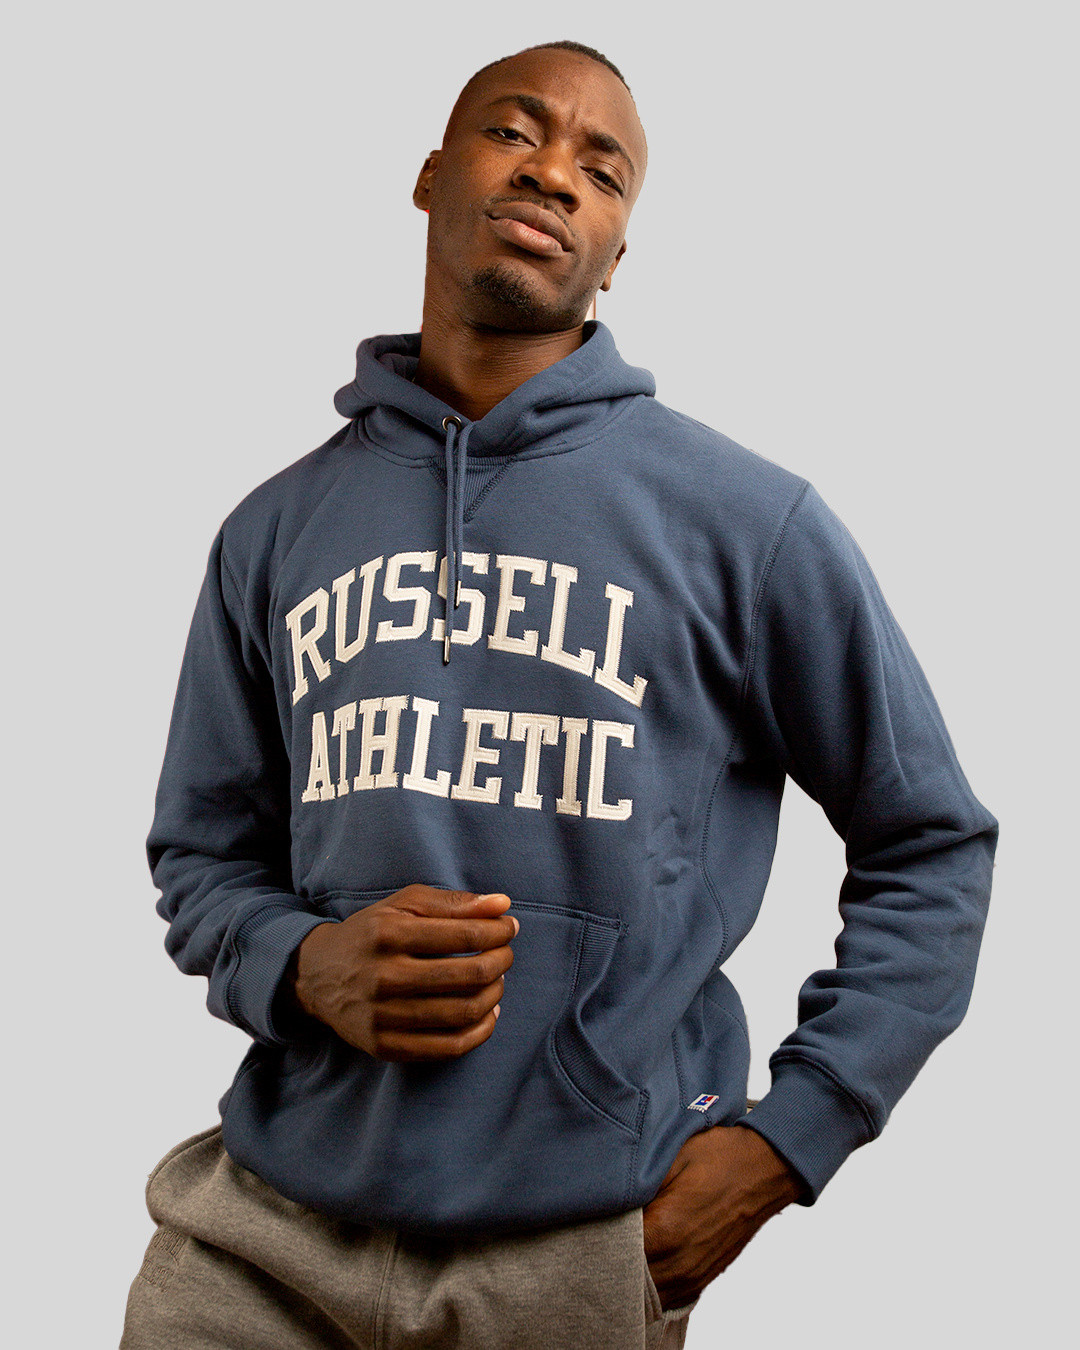 Russell Athletic - Felpa con cappuccio, Blu, large image number 2